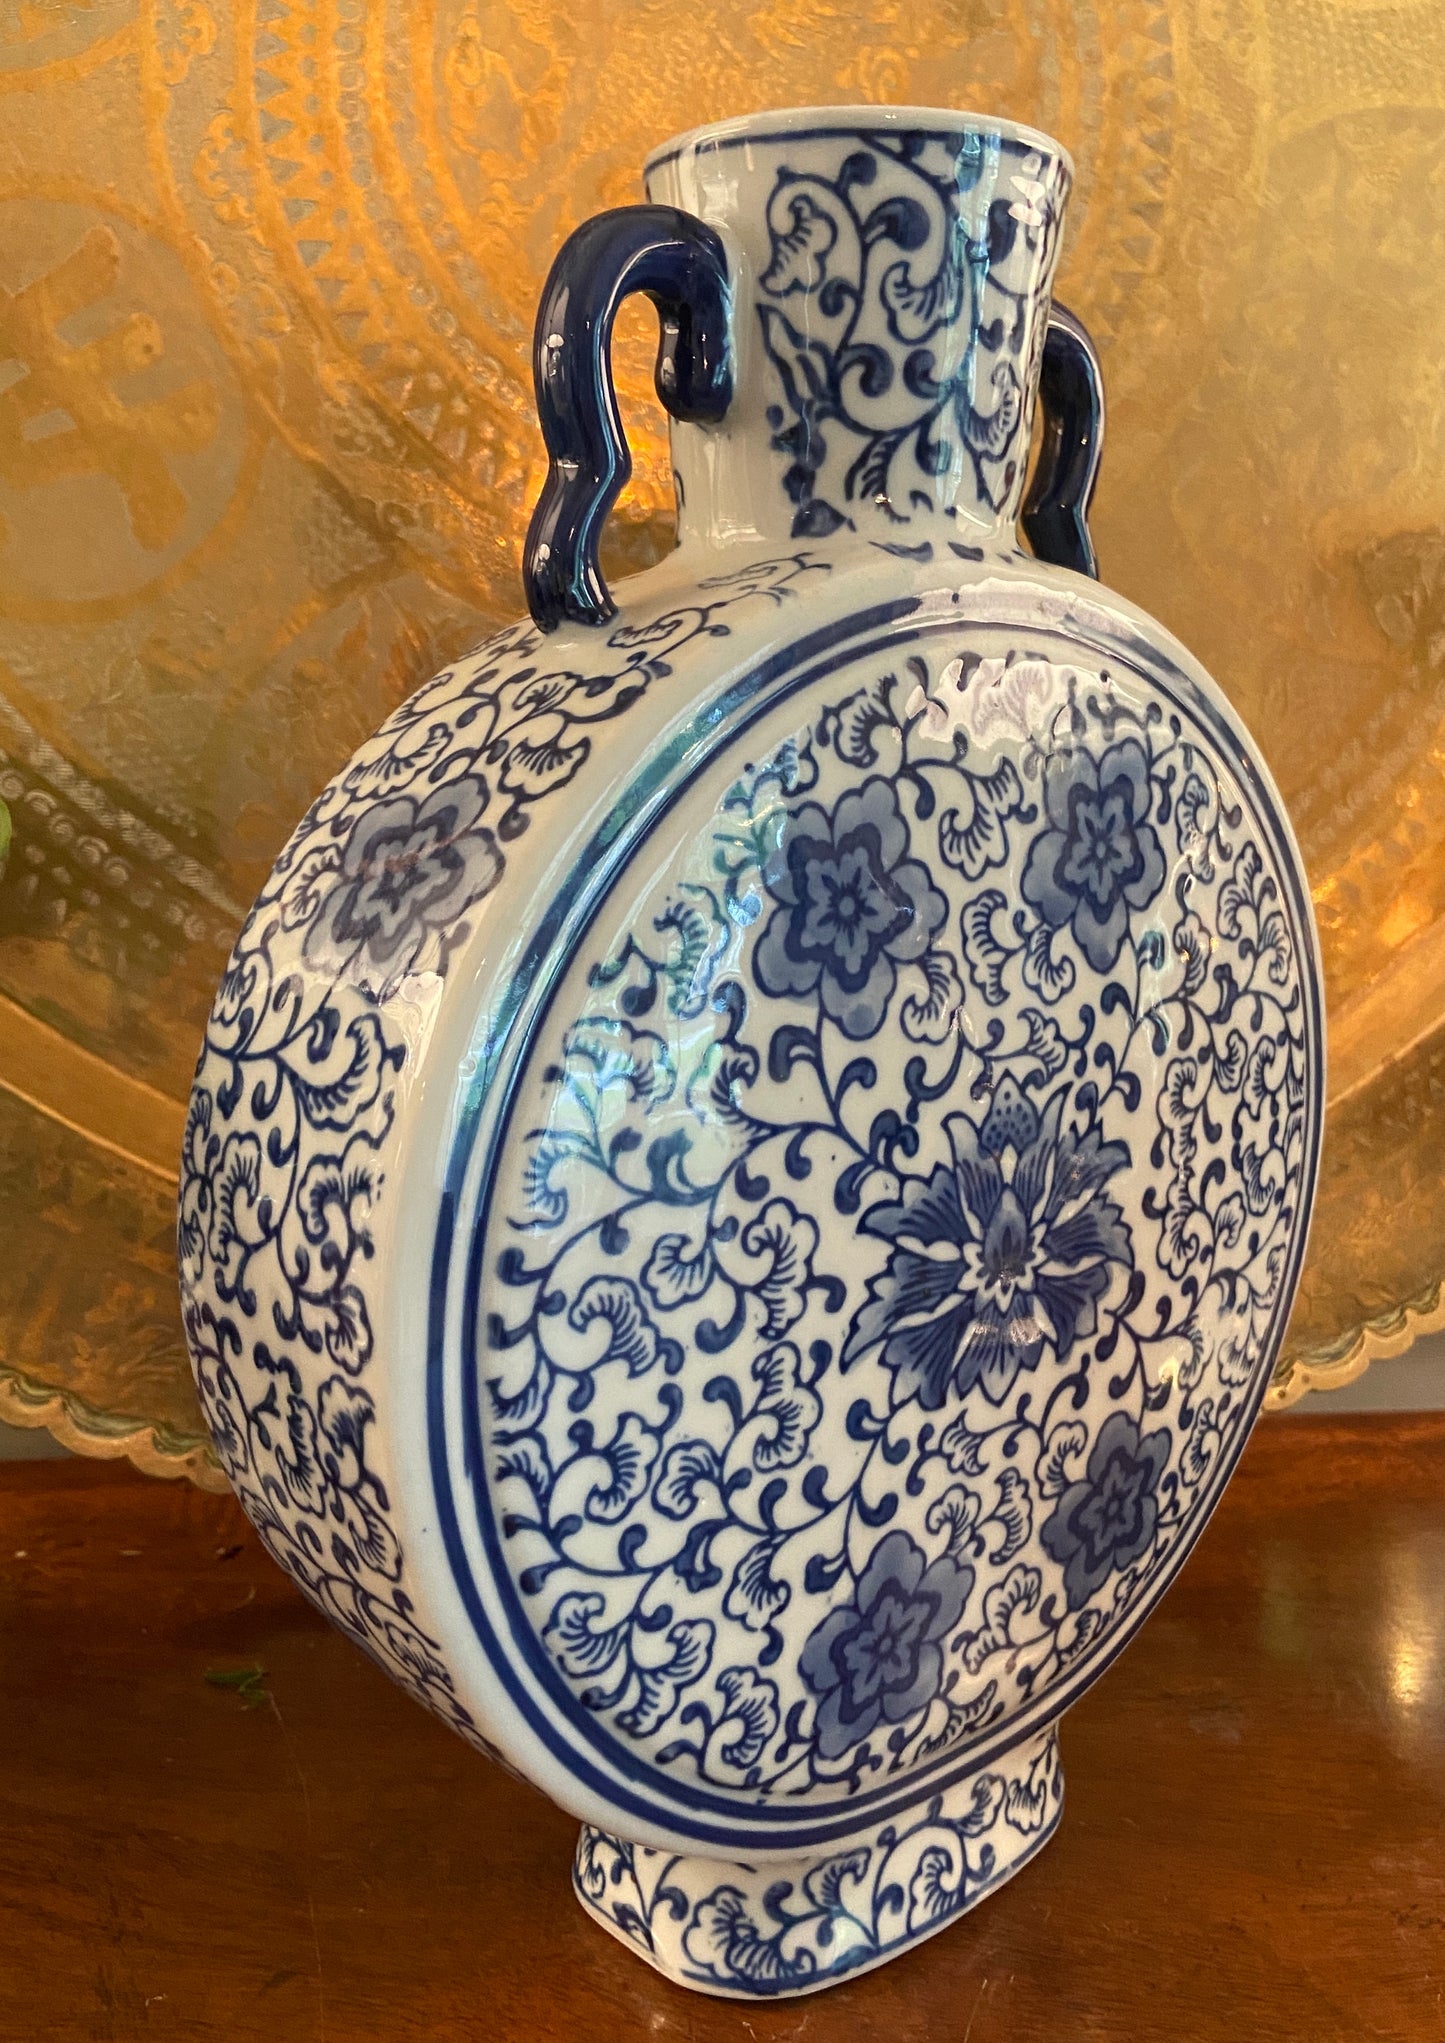 Large Blue & White Chinoiserie Moon Flask Vase, 12.5"H x 9"W x 3"D”